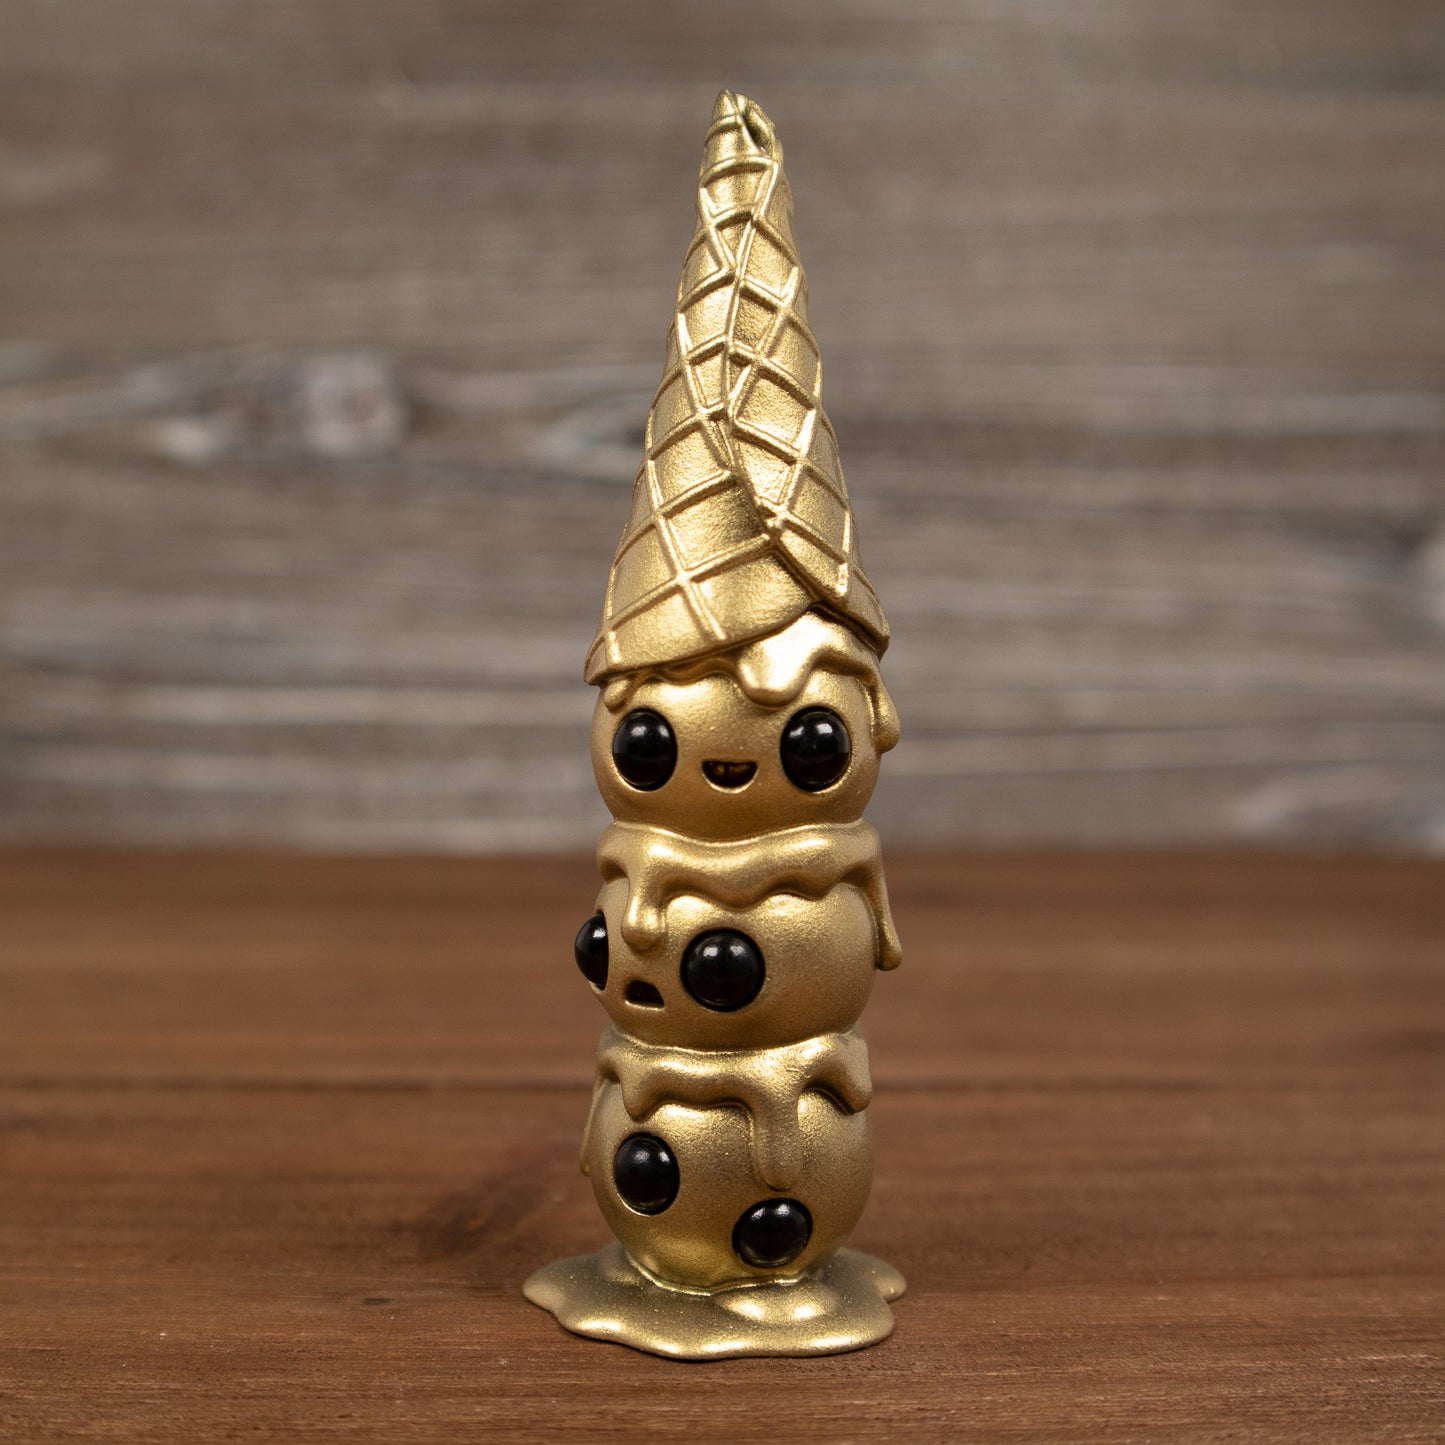 This is Wafull Melting Gold 3.75" Hand-Painted Resin Figure